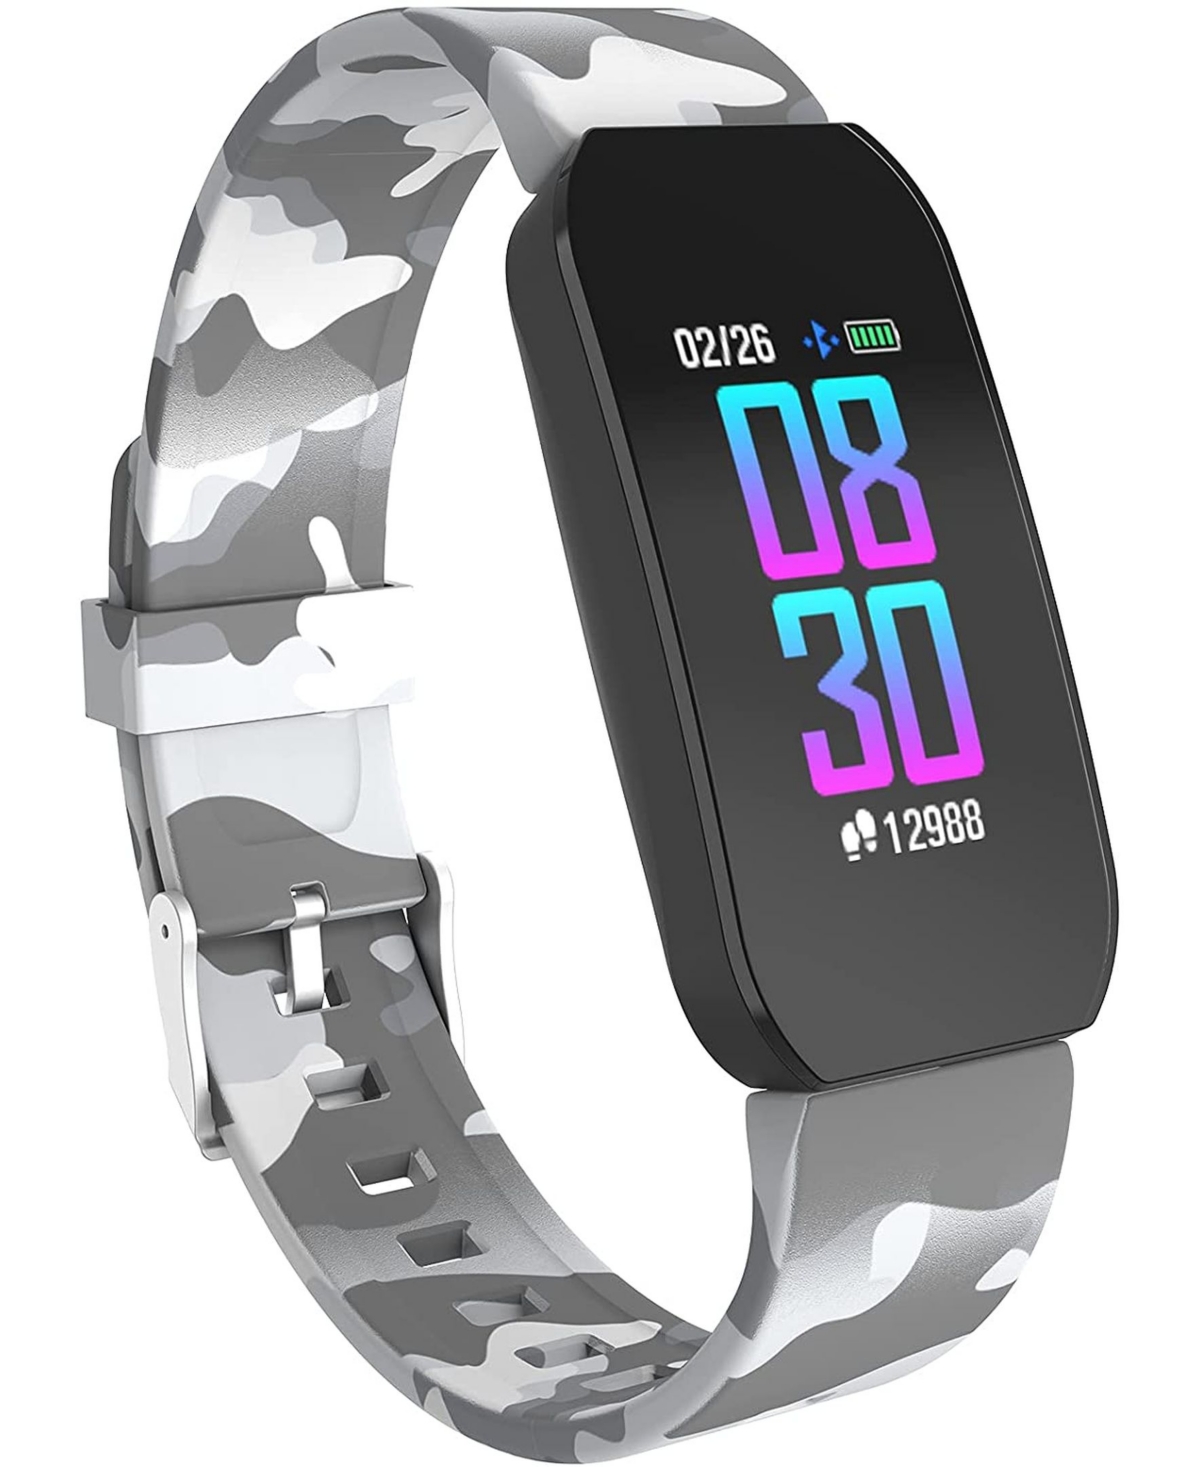 Itouch Unisex Gray Camo Silicone Strap Active Smartwatch 44mm